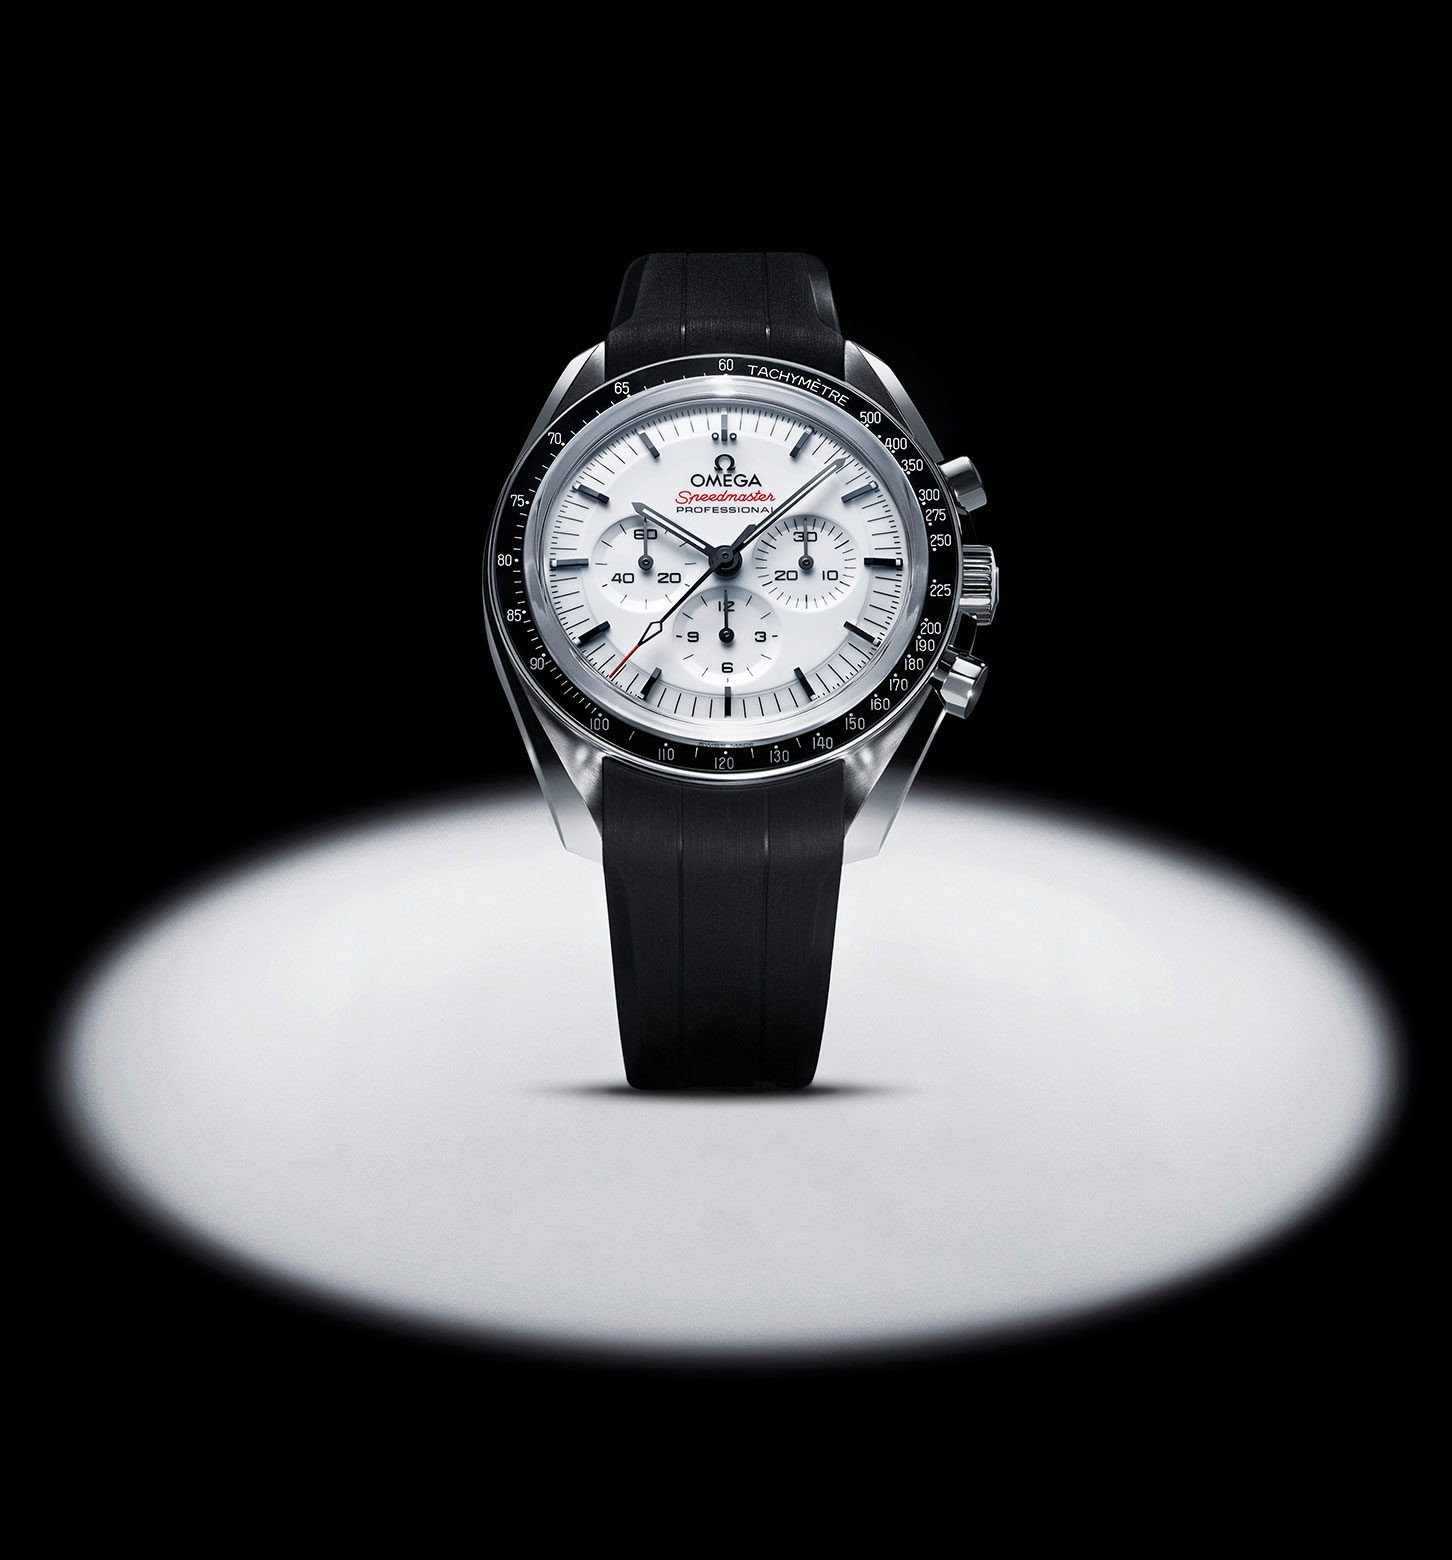 Omega Speedmaster Moonwatch in white dial with black rubber strap